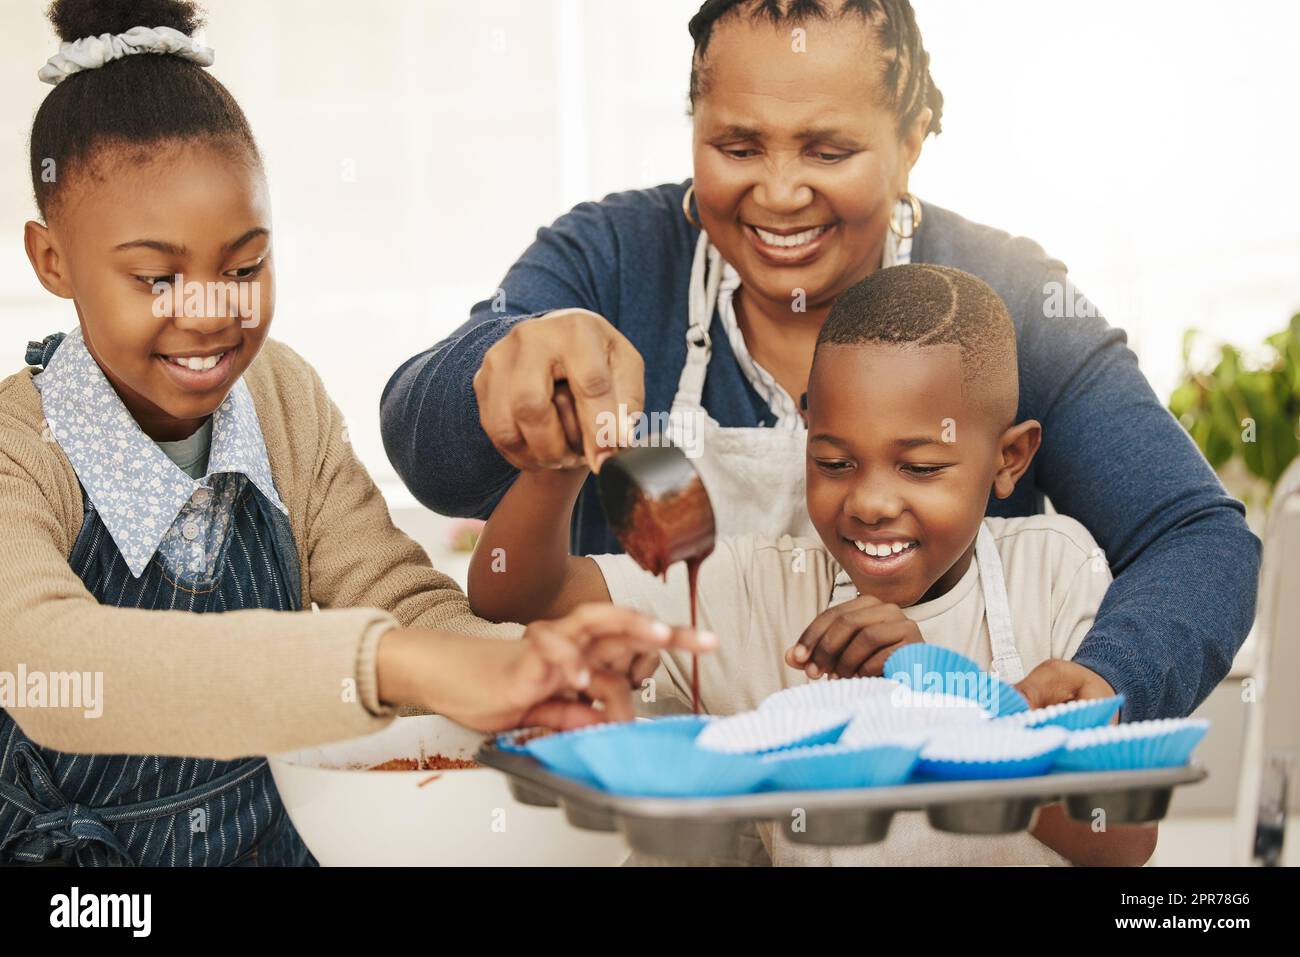 Well make extra to take home. Shot of a grandmother baking with her two grandkids at home. Stock Photo